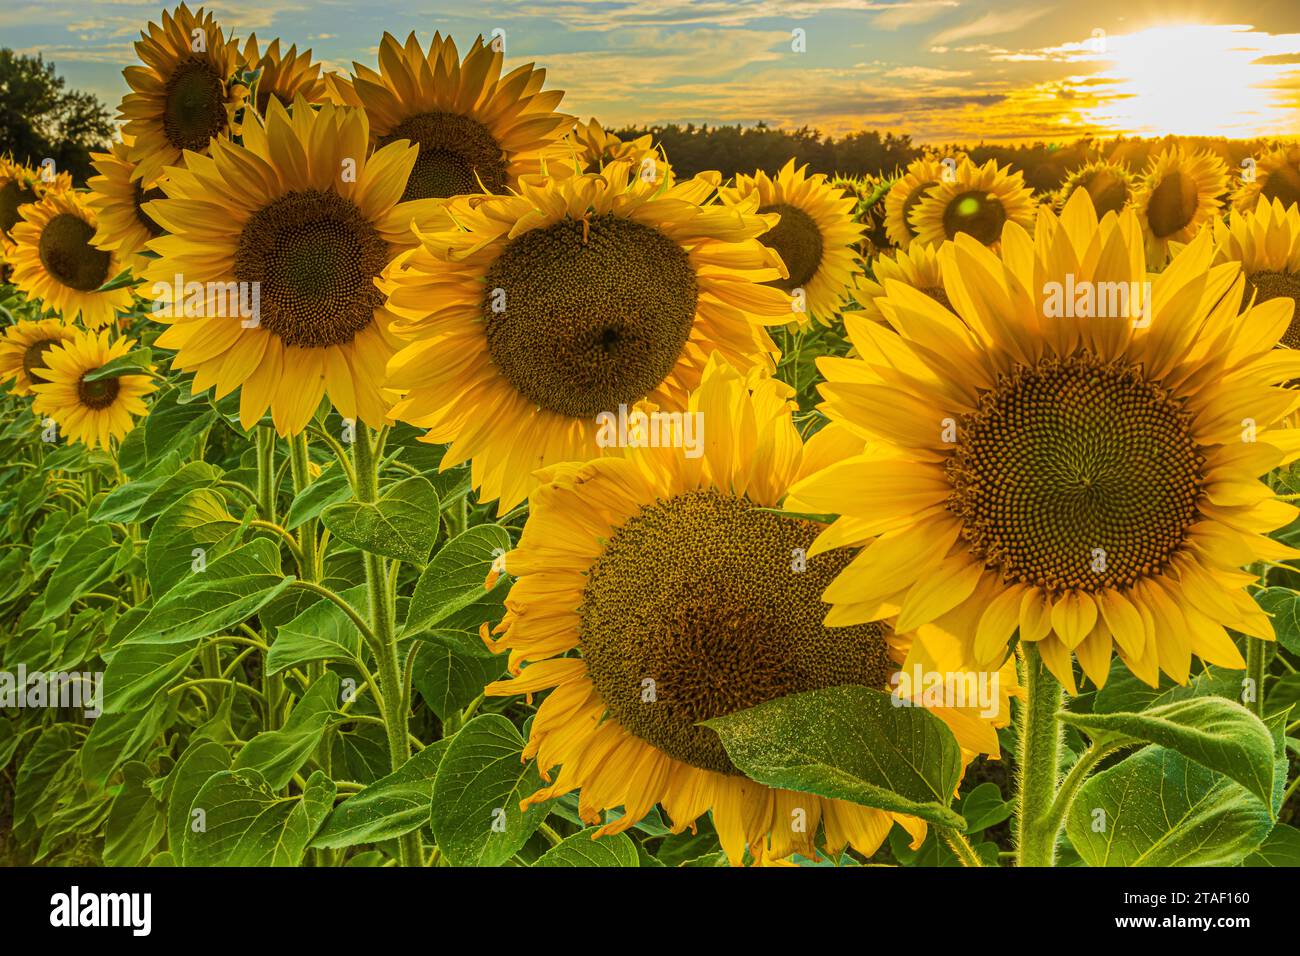 field with lots of sunflowers. Detailed shot of a flower in the foreground. Landscape in summer with low sun in sunshine. Crops with large yellow open Stock Photo